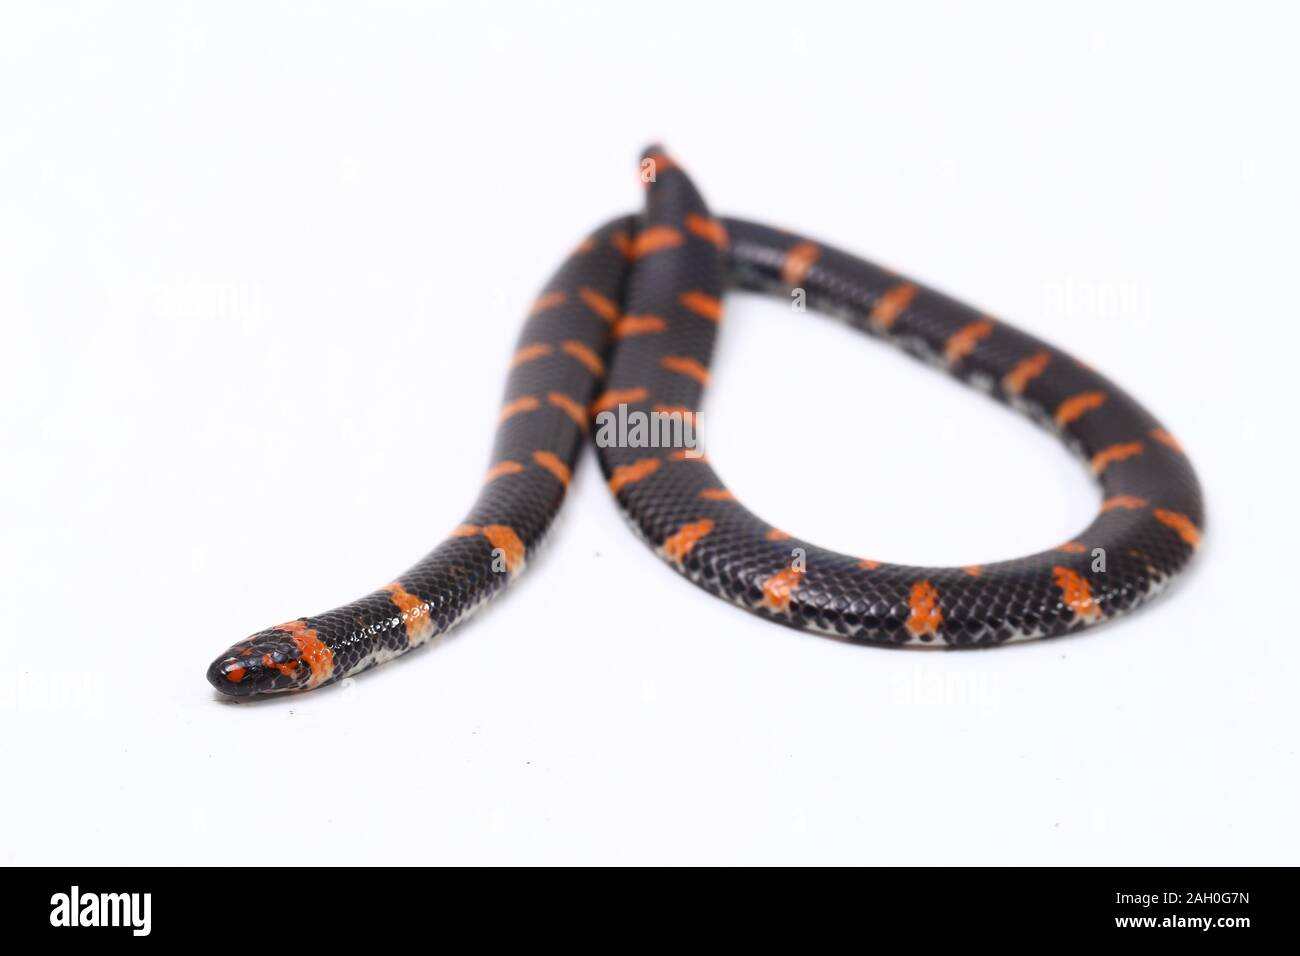 Red-tailed Pipe Snake (Cylindrophis ruffus)